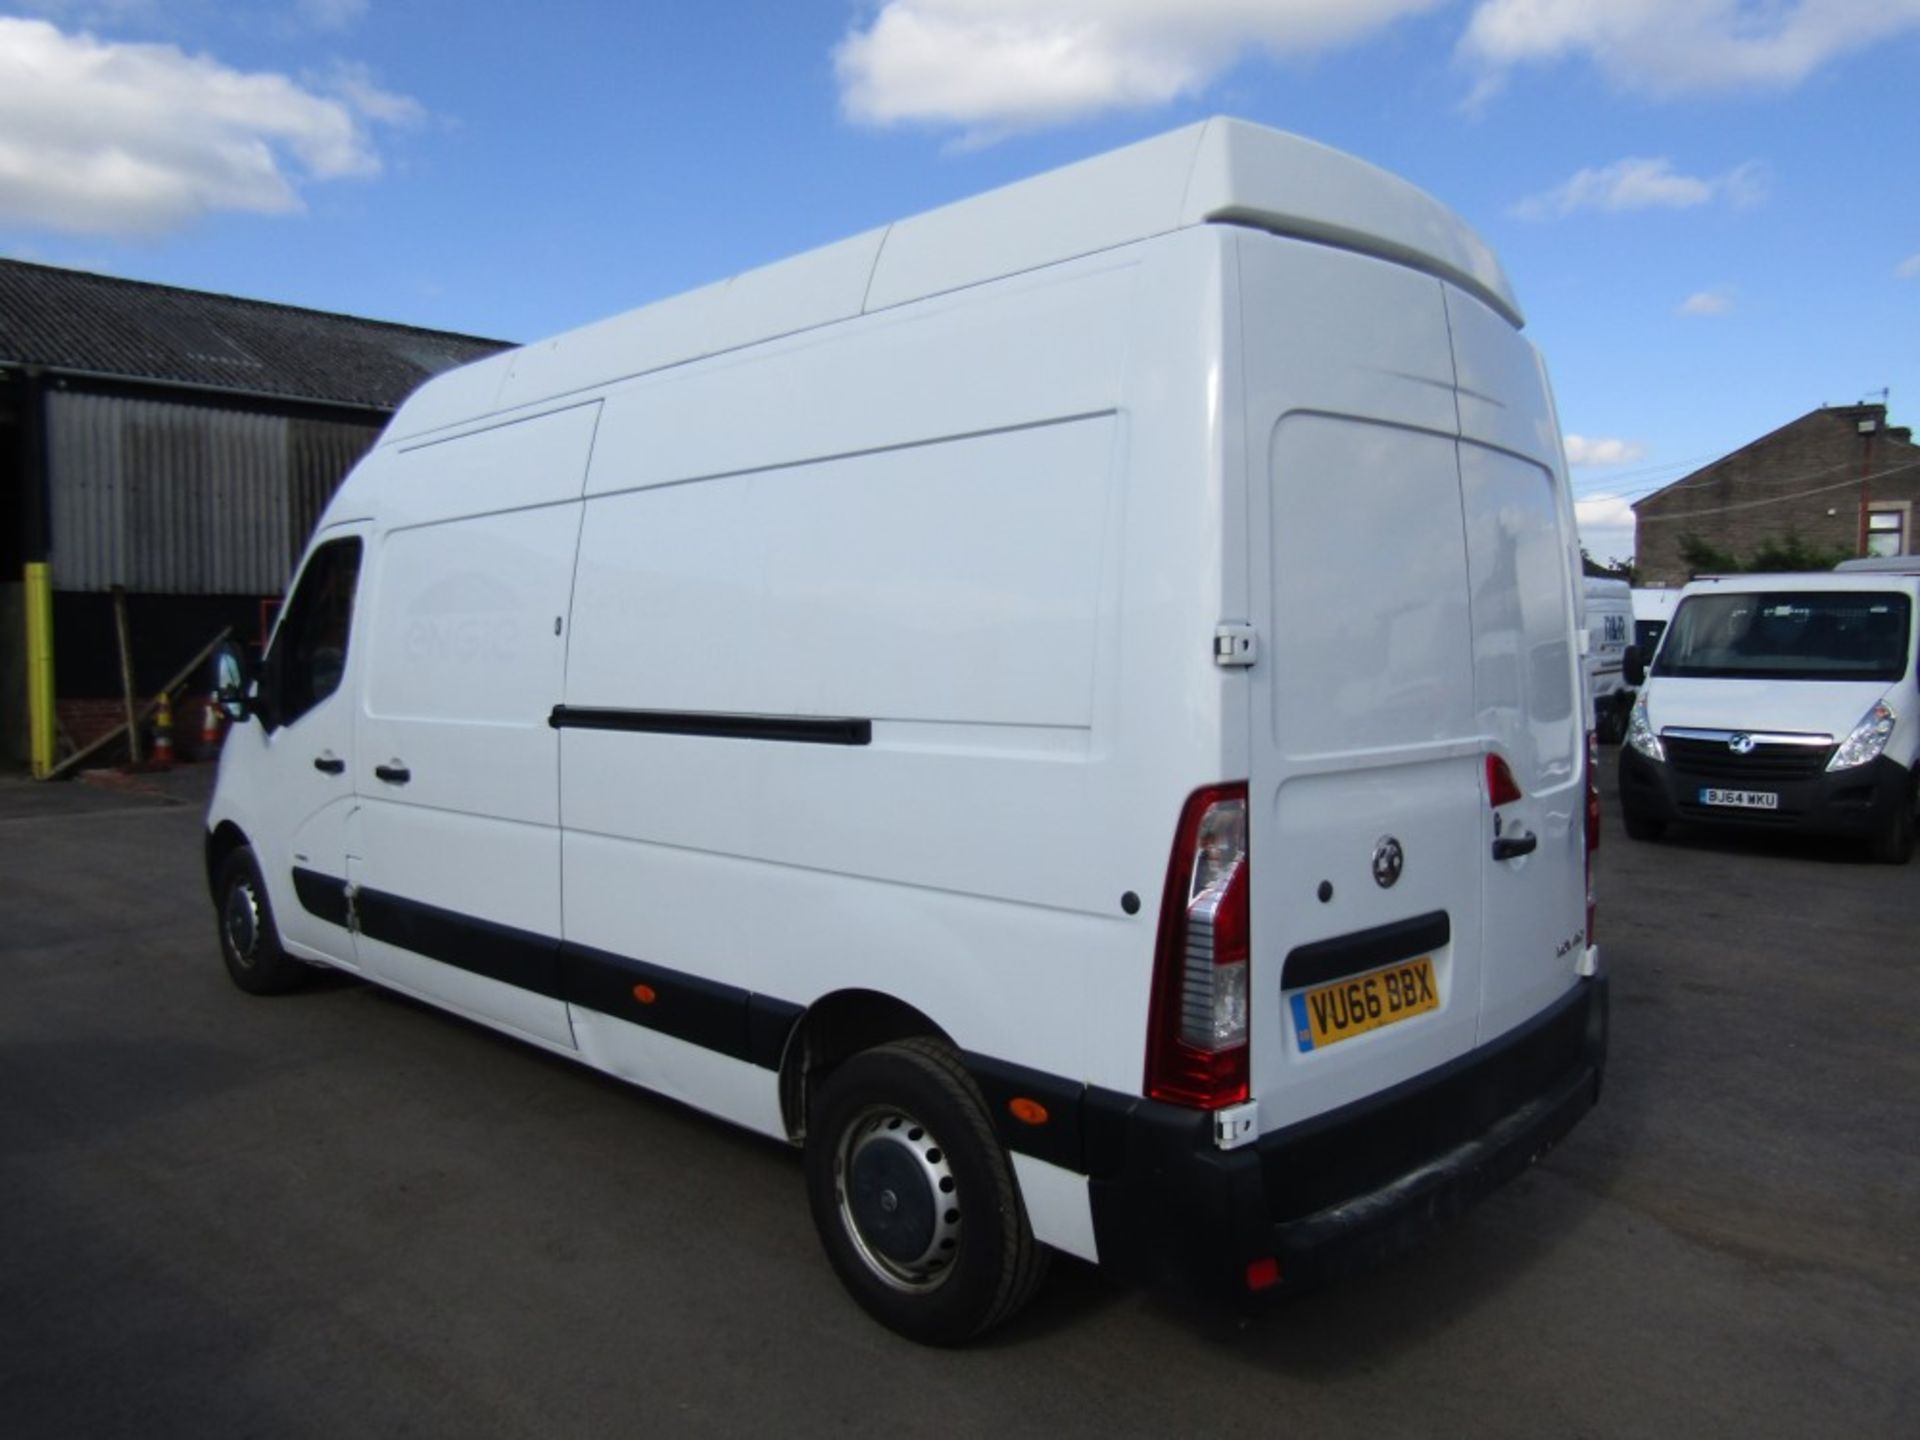 66 reg VAUXHALL MOVANO F3500 L3H3 CDTI, 1ST REG 09/16, TEST 09/22, 58452M, V5 HERE, 1 OWNER FROM NEW - Image 3 of 7